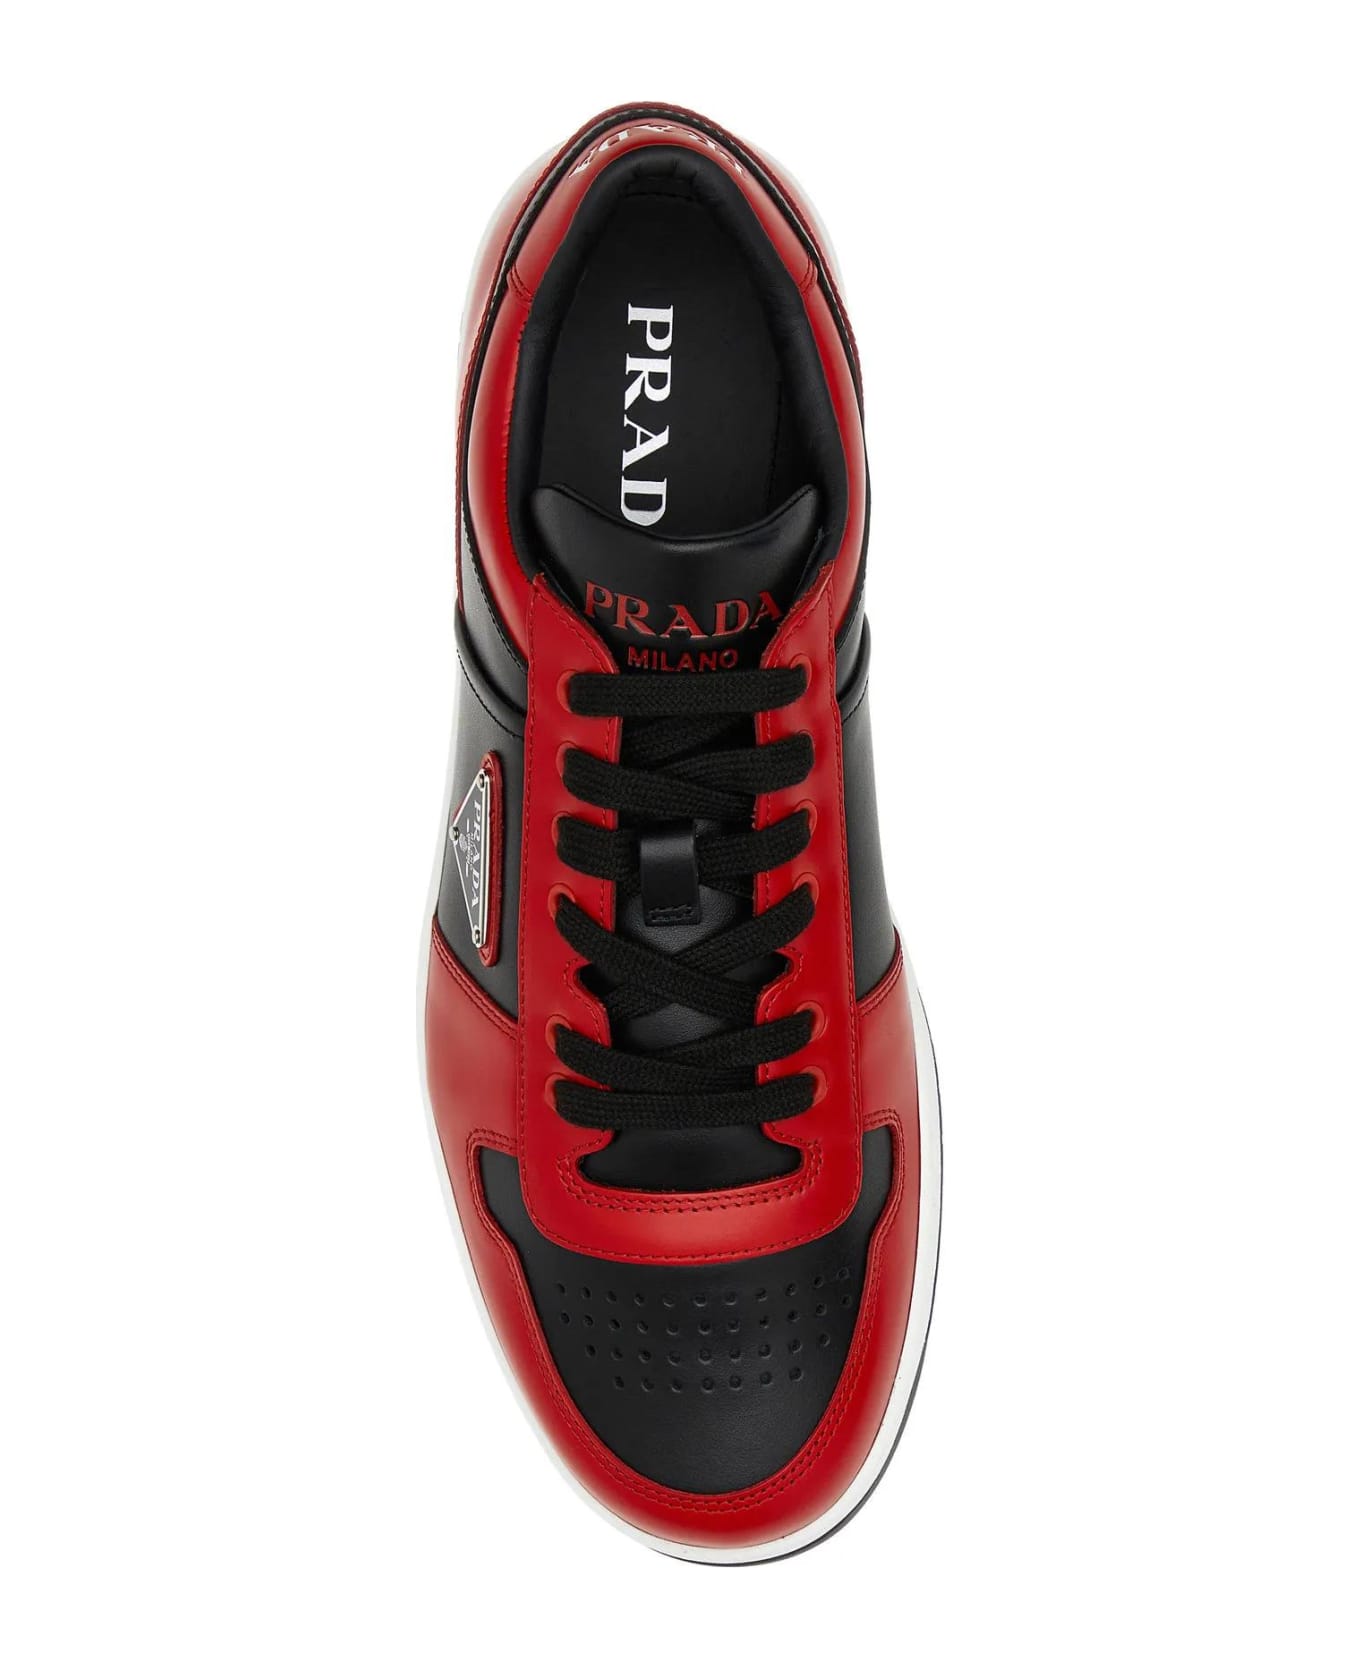 Prada Two-tone Leather Downtown Sneakers - NERO+LACCA スニーカー